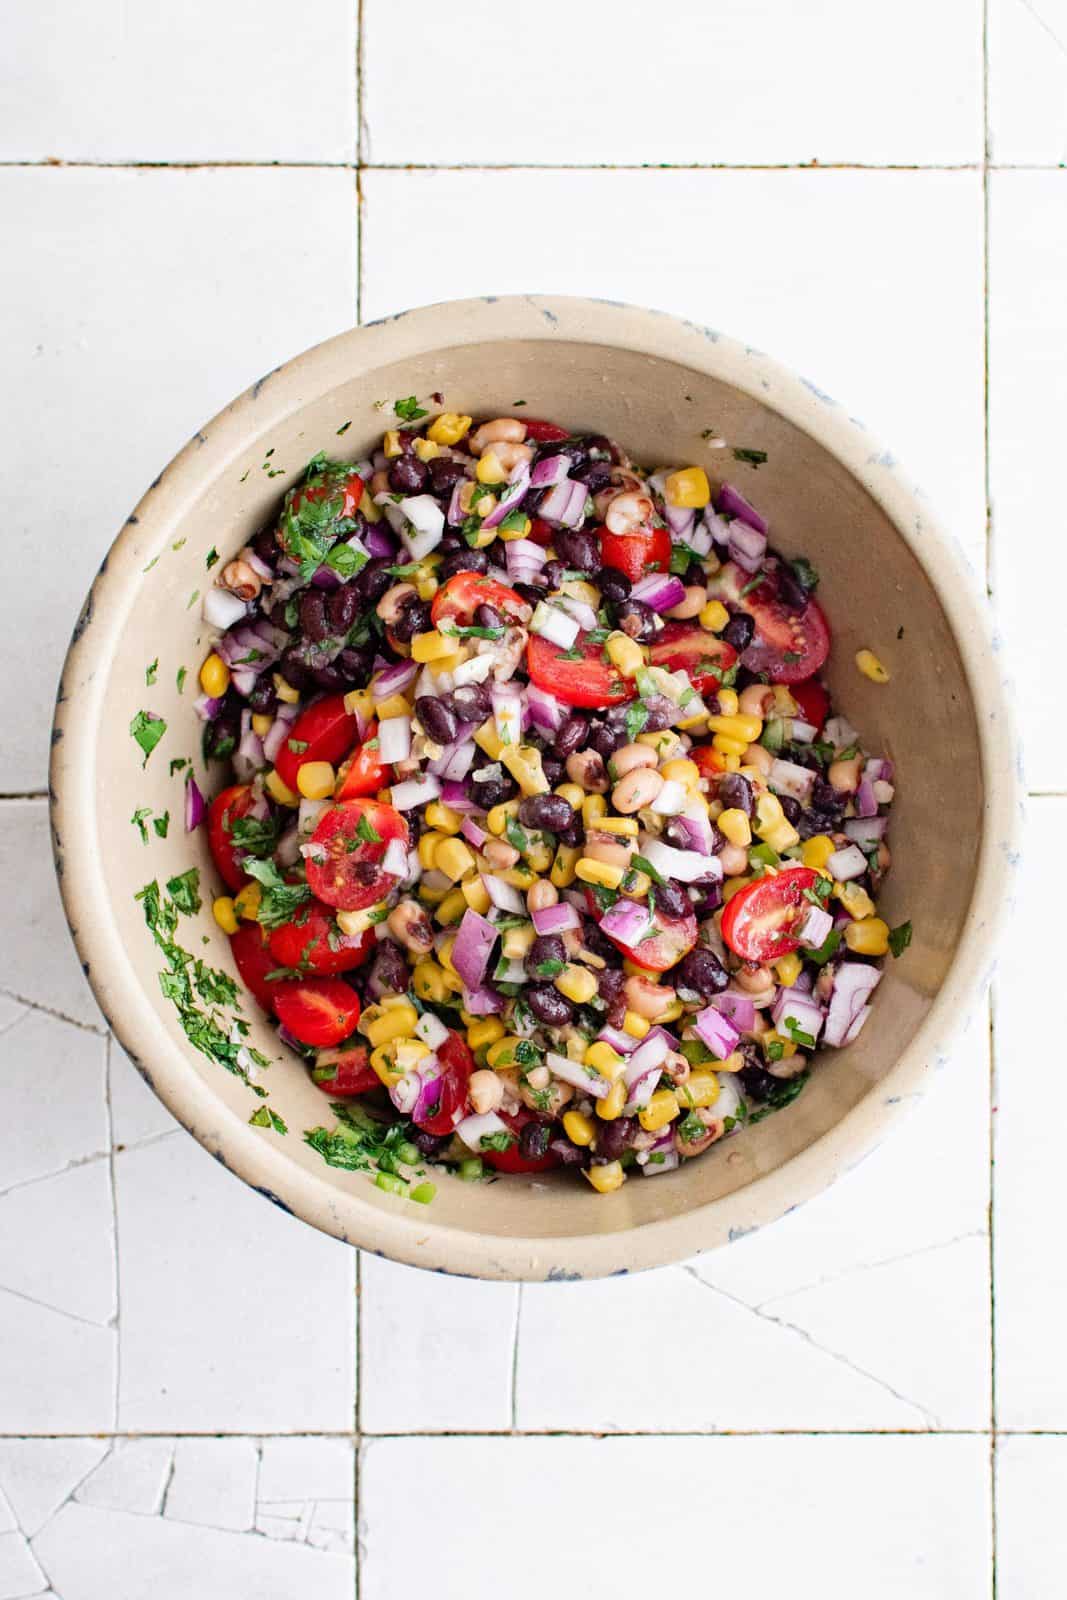 Corn, black beans, black eyed peas, tomatoes, cilantro, onion, jalapeno, garlic, olive oil, lime juice and salt in large bowl tossed together.